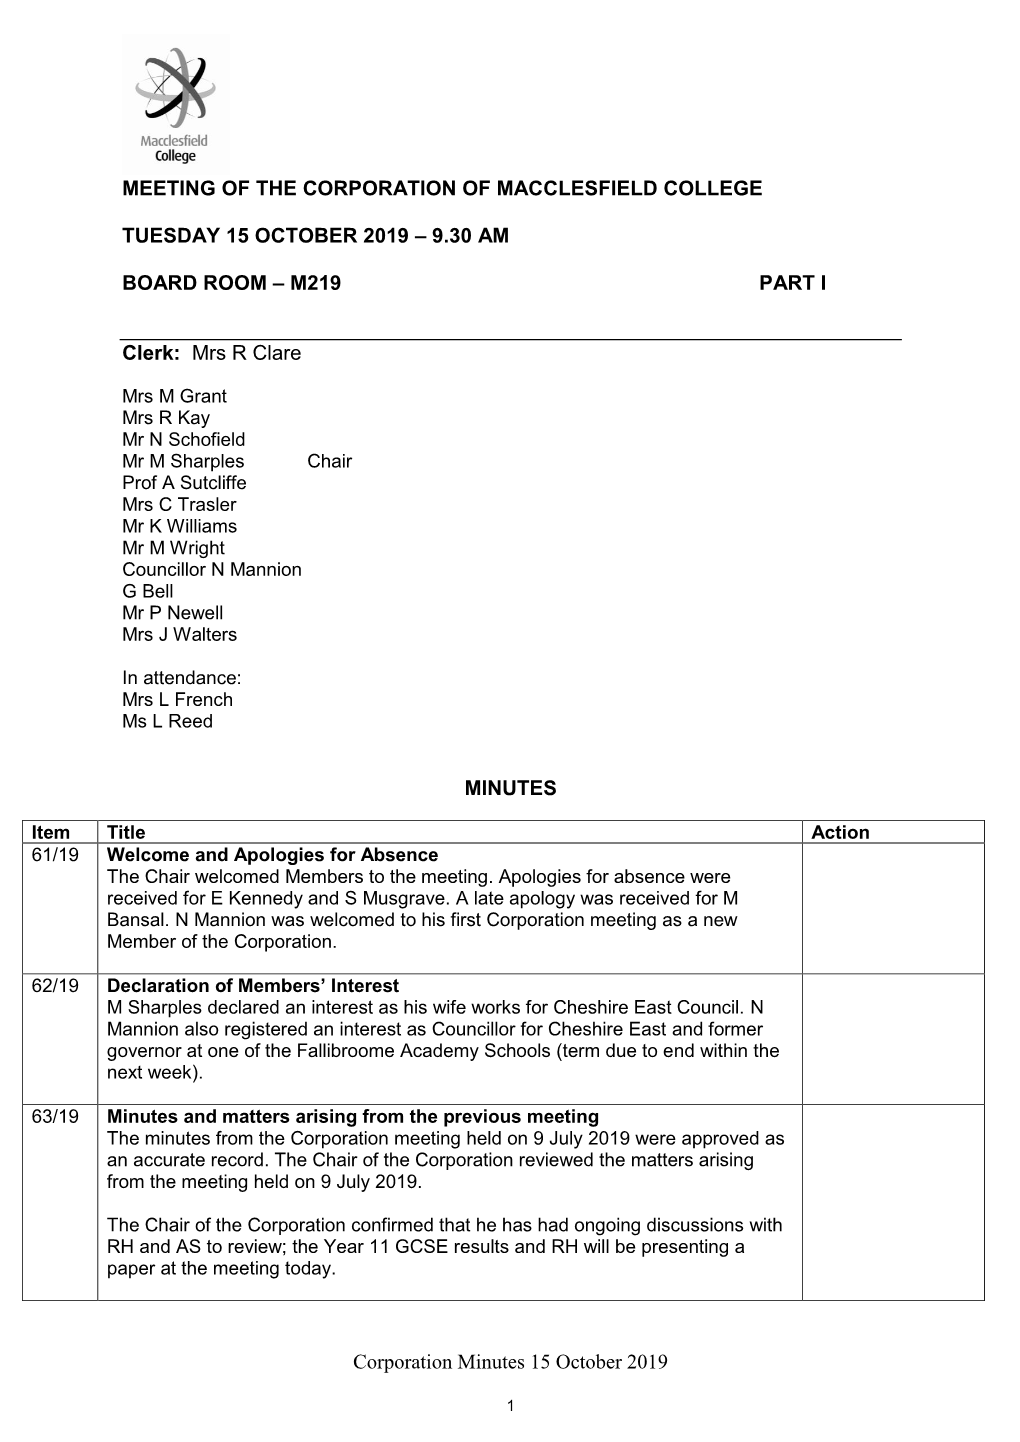 Corporation Minutes 15 October 2019 MEETING